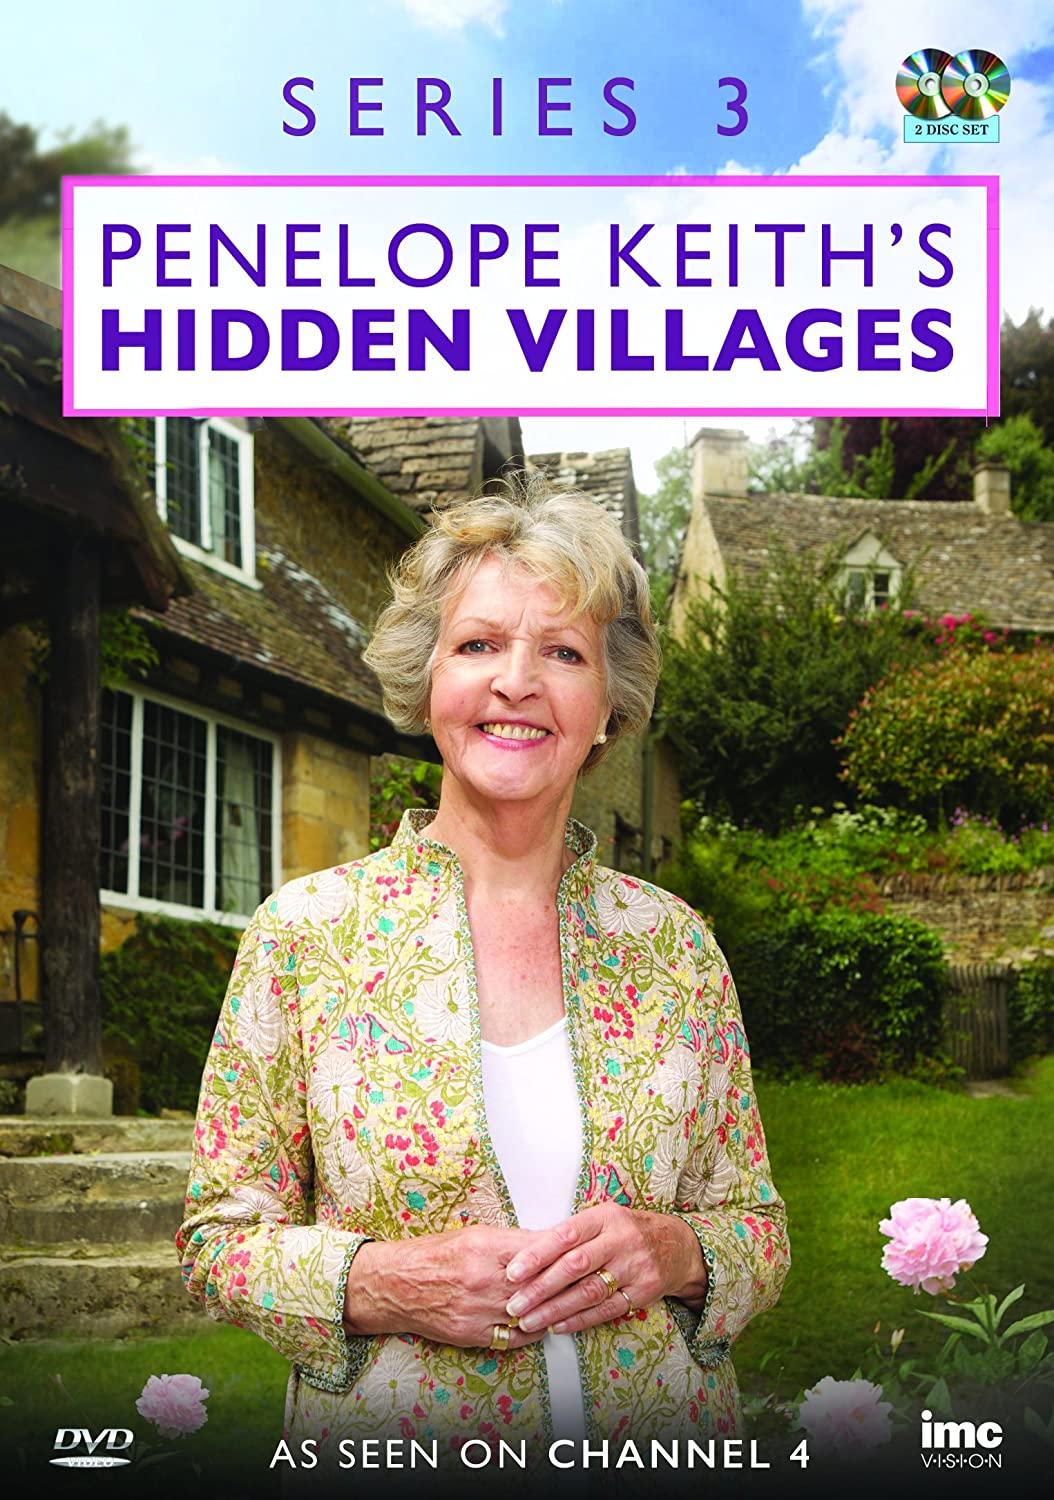 Penelope Keith's Hidden Villages Series 3 - As Seen on Channel 4 - Drama [DVD]